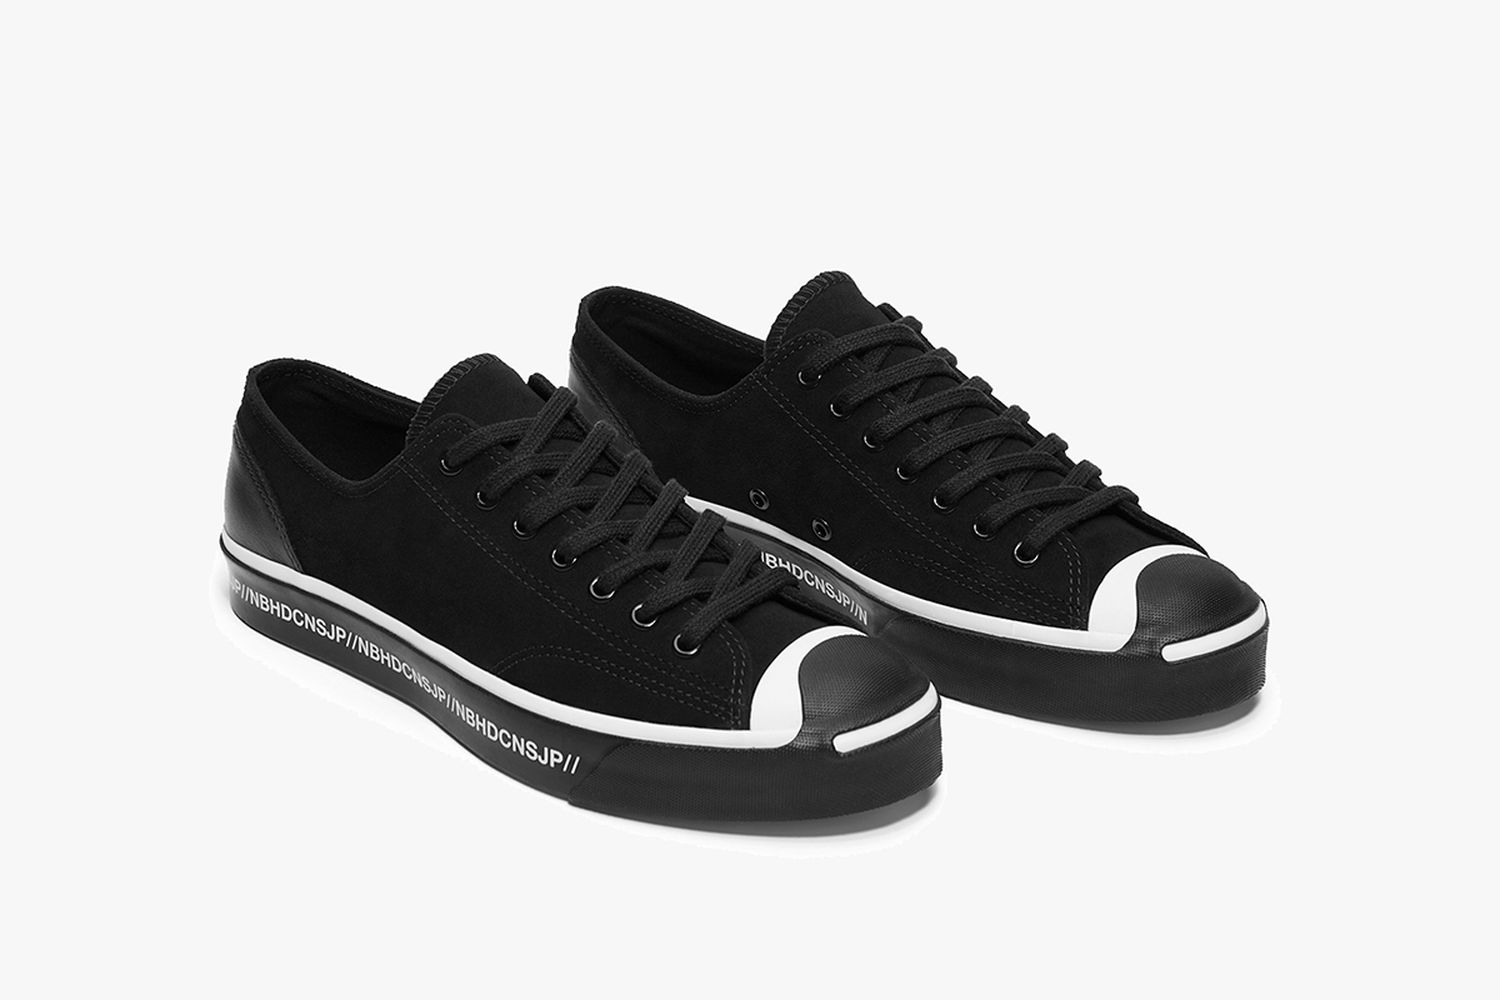 Jack Purcell Ox